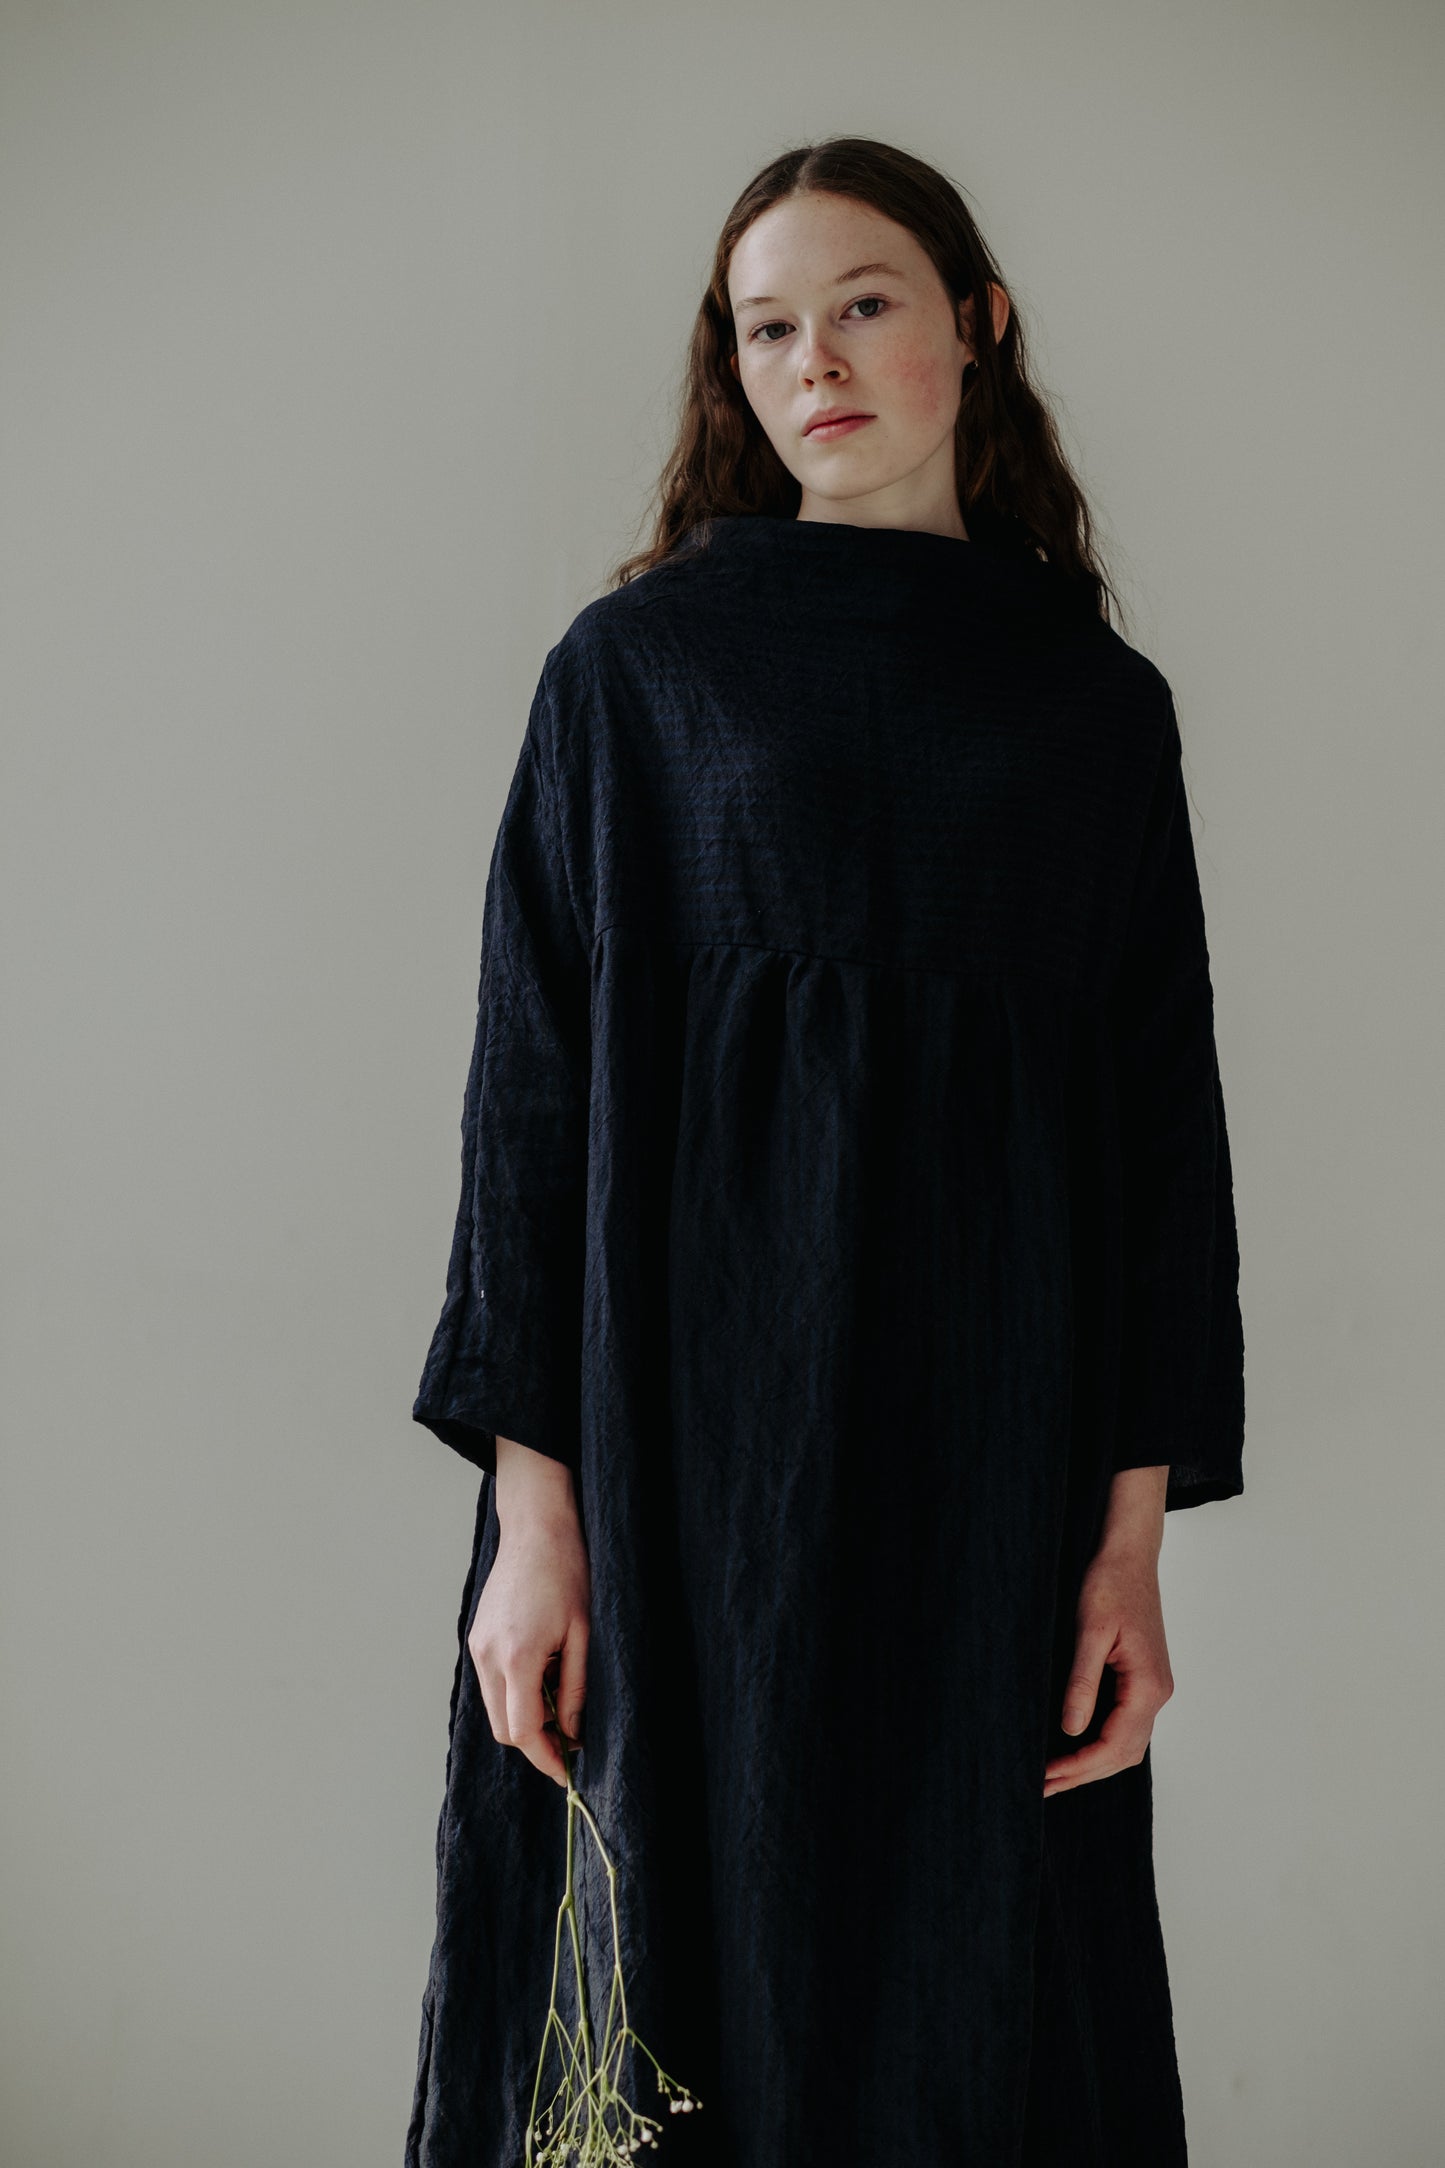 TILLIE DRESS | An effortless throw on that will feel right at home in a considered, every-day wardrobe. Tillie features a high neckline that sits elegantly across the neck- she can easily be dressed up or down and layered up for the colder months. Pair wi